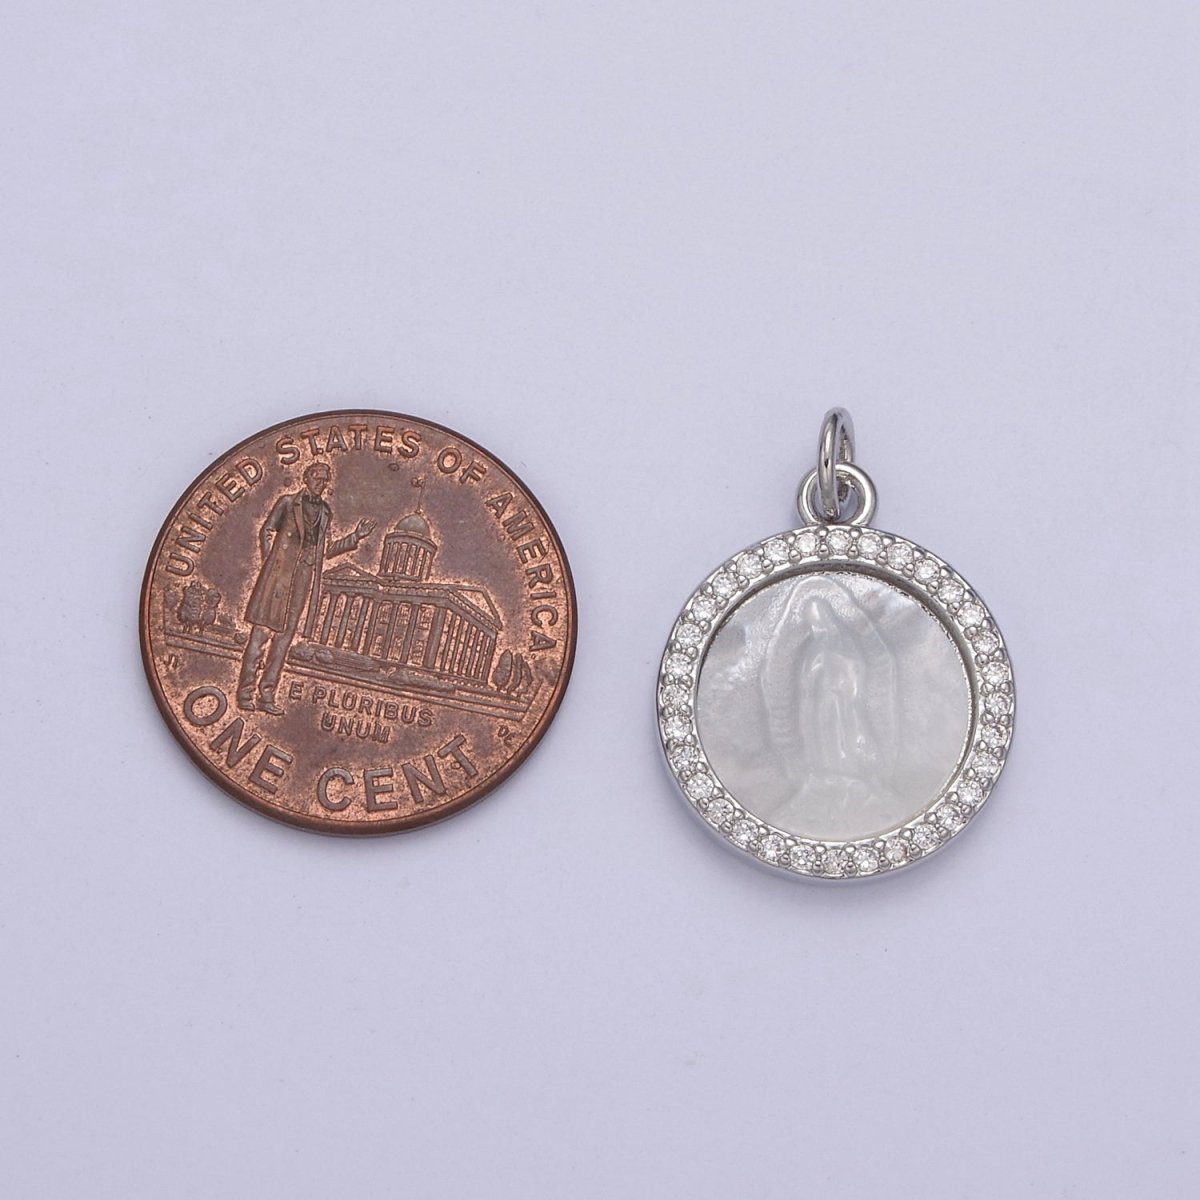 Silver Mother of Pearl Virgin Mary, CZ Micro Pave Charm Pendant, Shell Virgin Mary Round Charm N-859 - DLUXCA